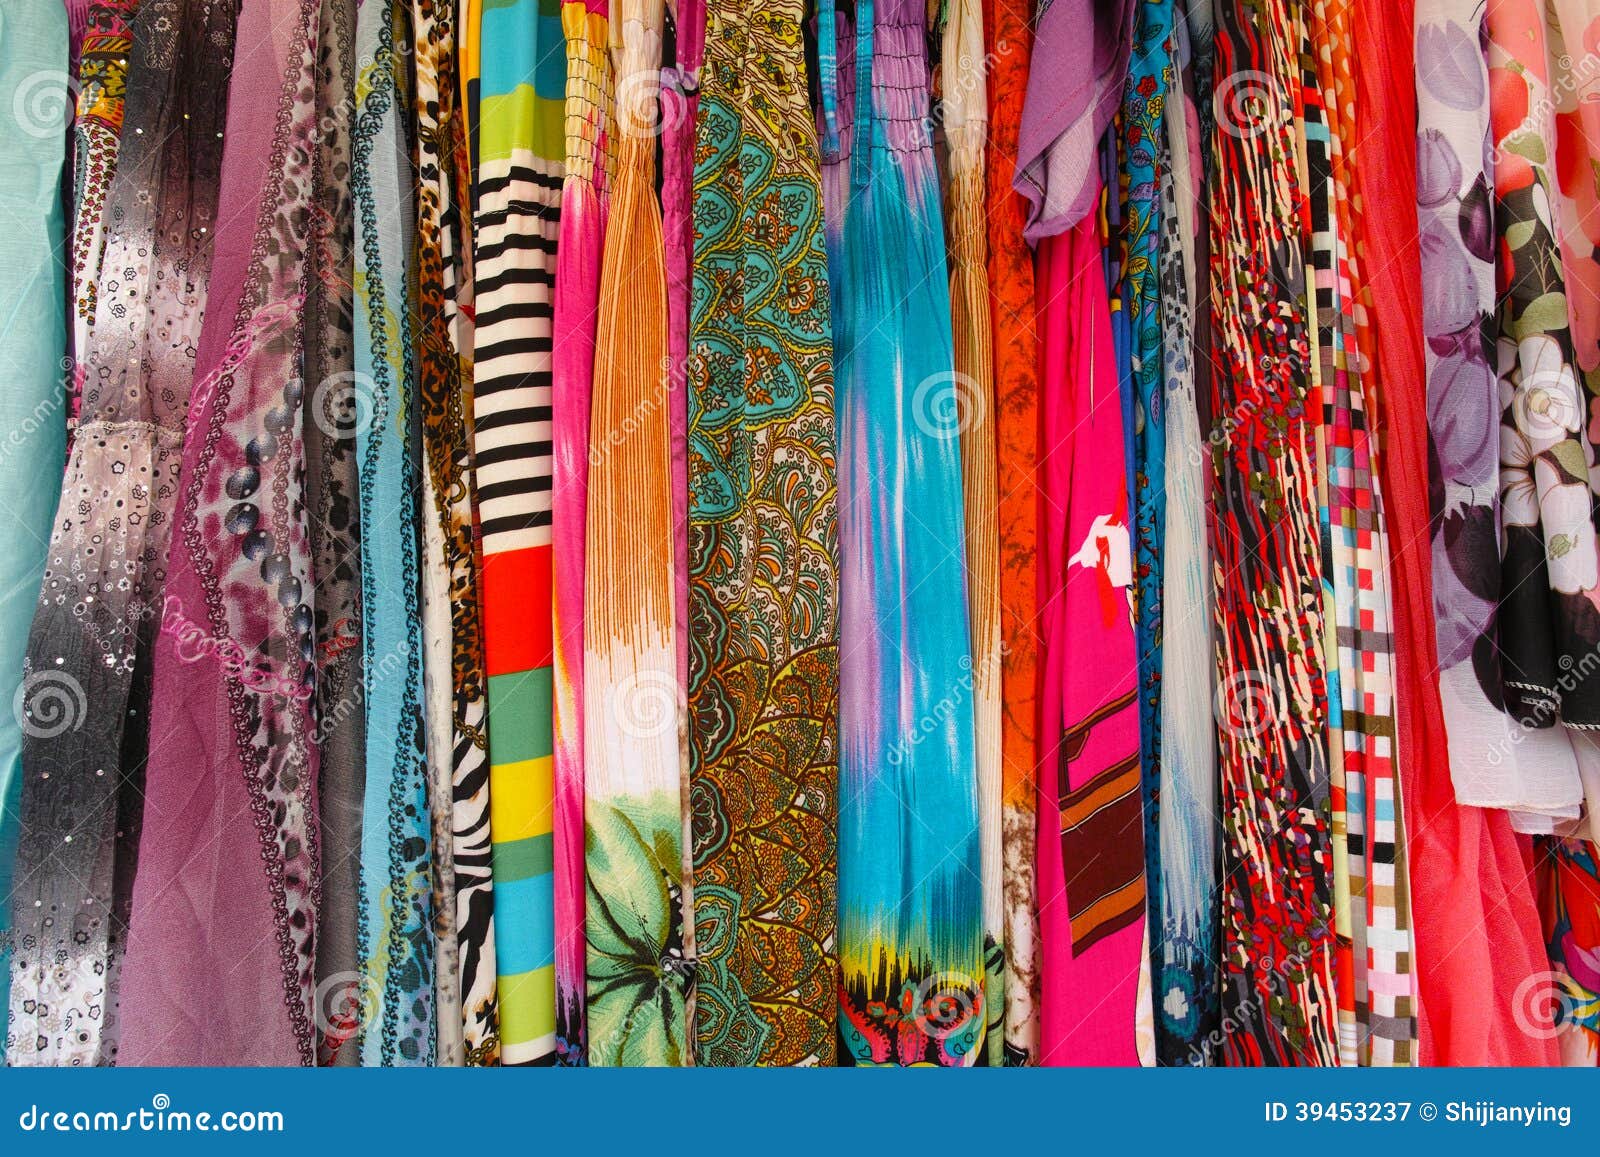 Color skirts stock image. Image of textiles, skirt, embroider - 39453237